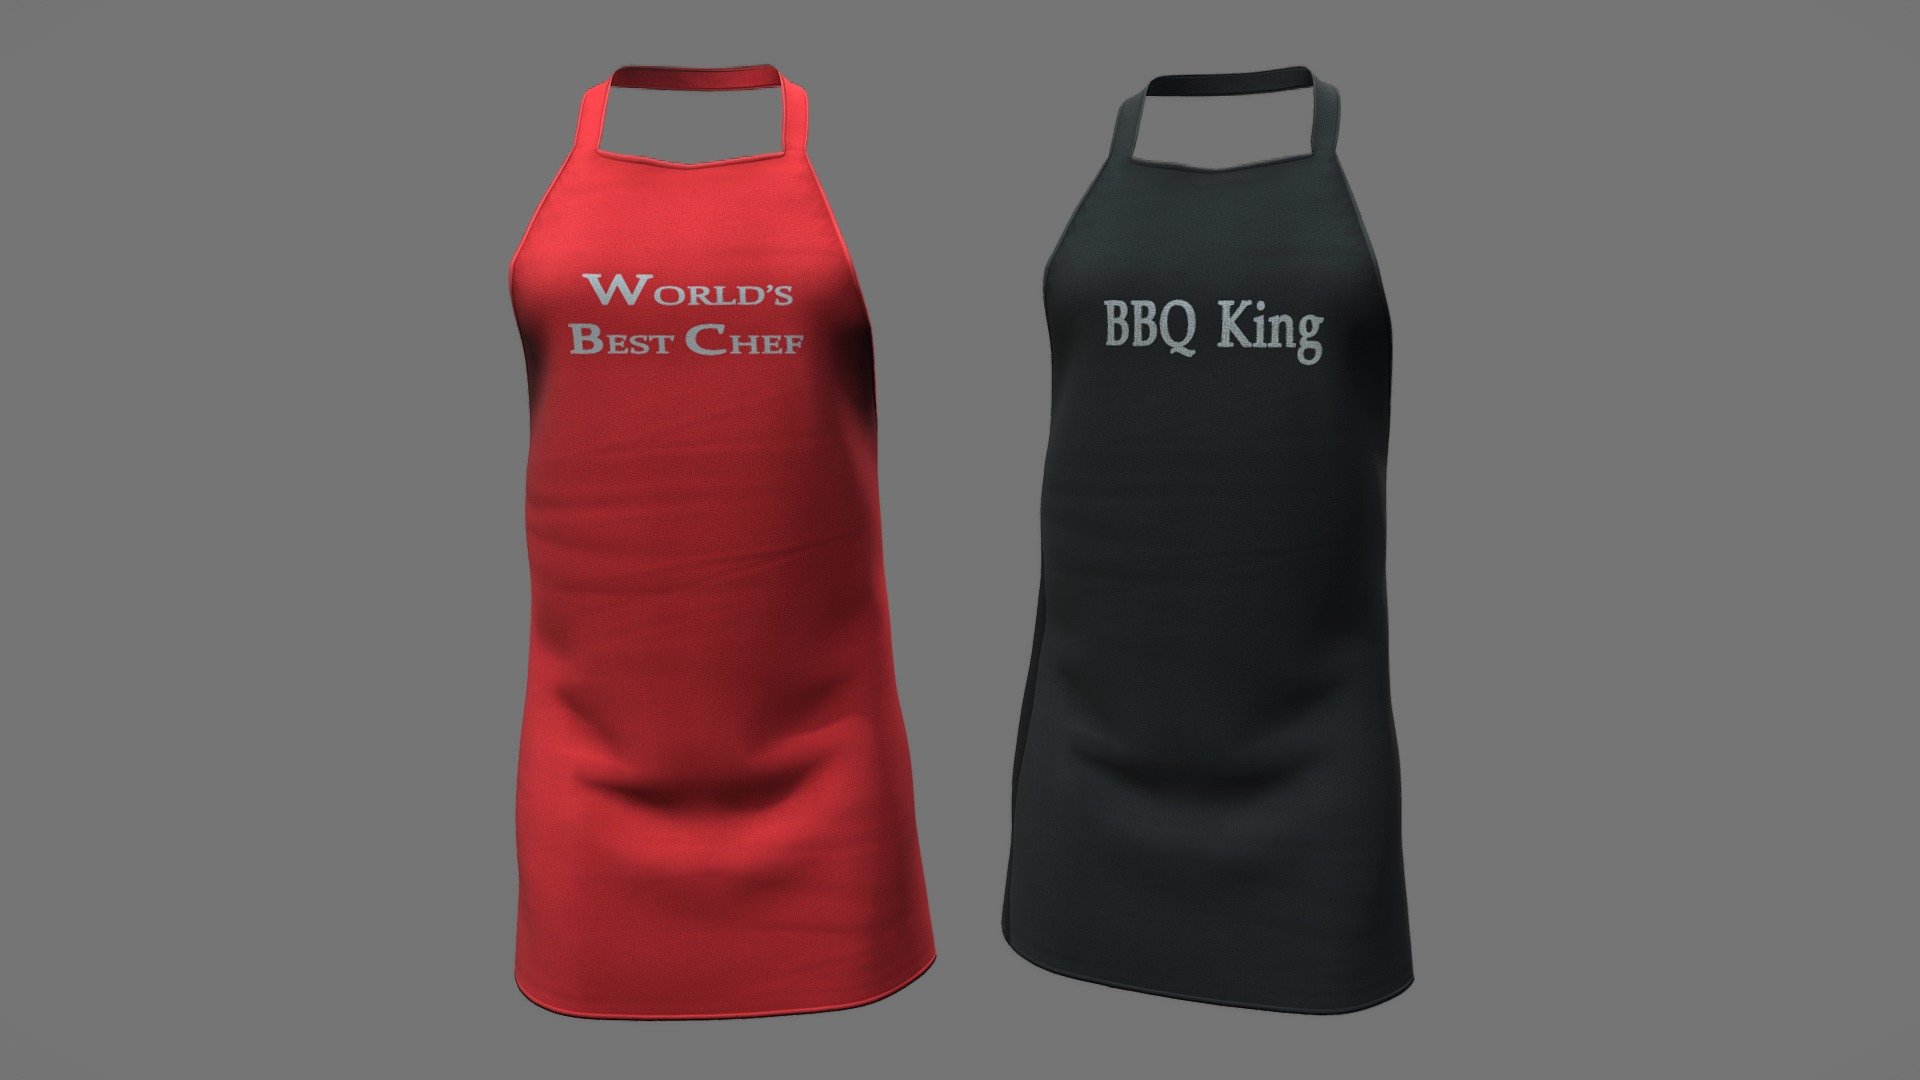 Cooking apron for male chefs

Can be fitted to any character

Clean topology

No overlapping smart optimized unwrapped UVs

High-quality realistic textures

FBX, OBJ, gITF, USDZ (request other formats)

PBR or Classic

Type     user:3dia &ldquo;search term